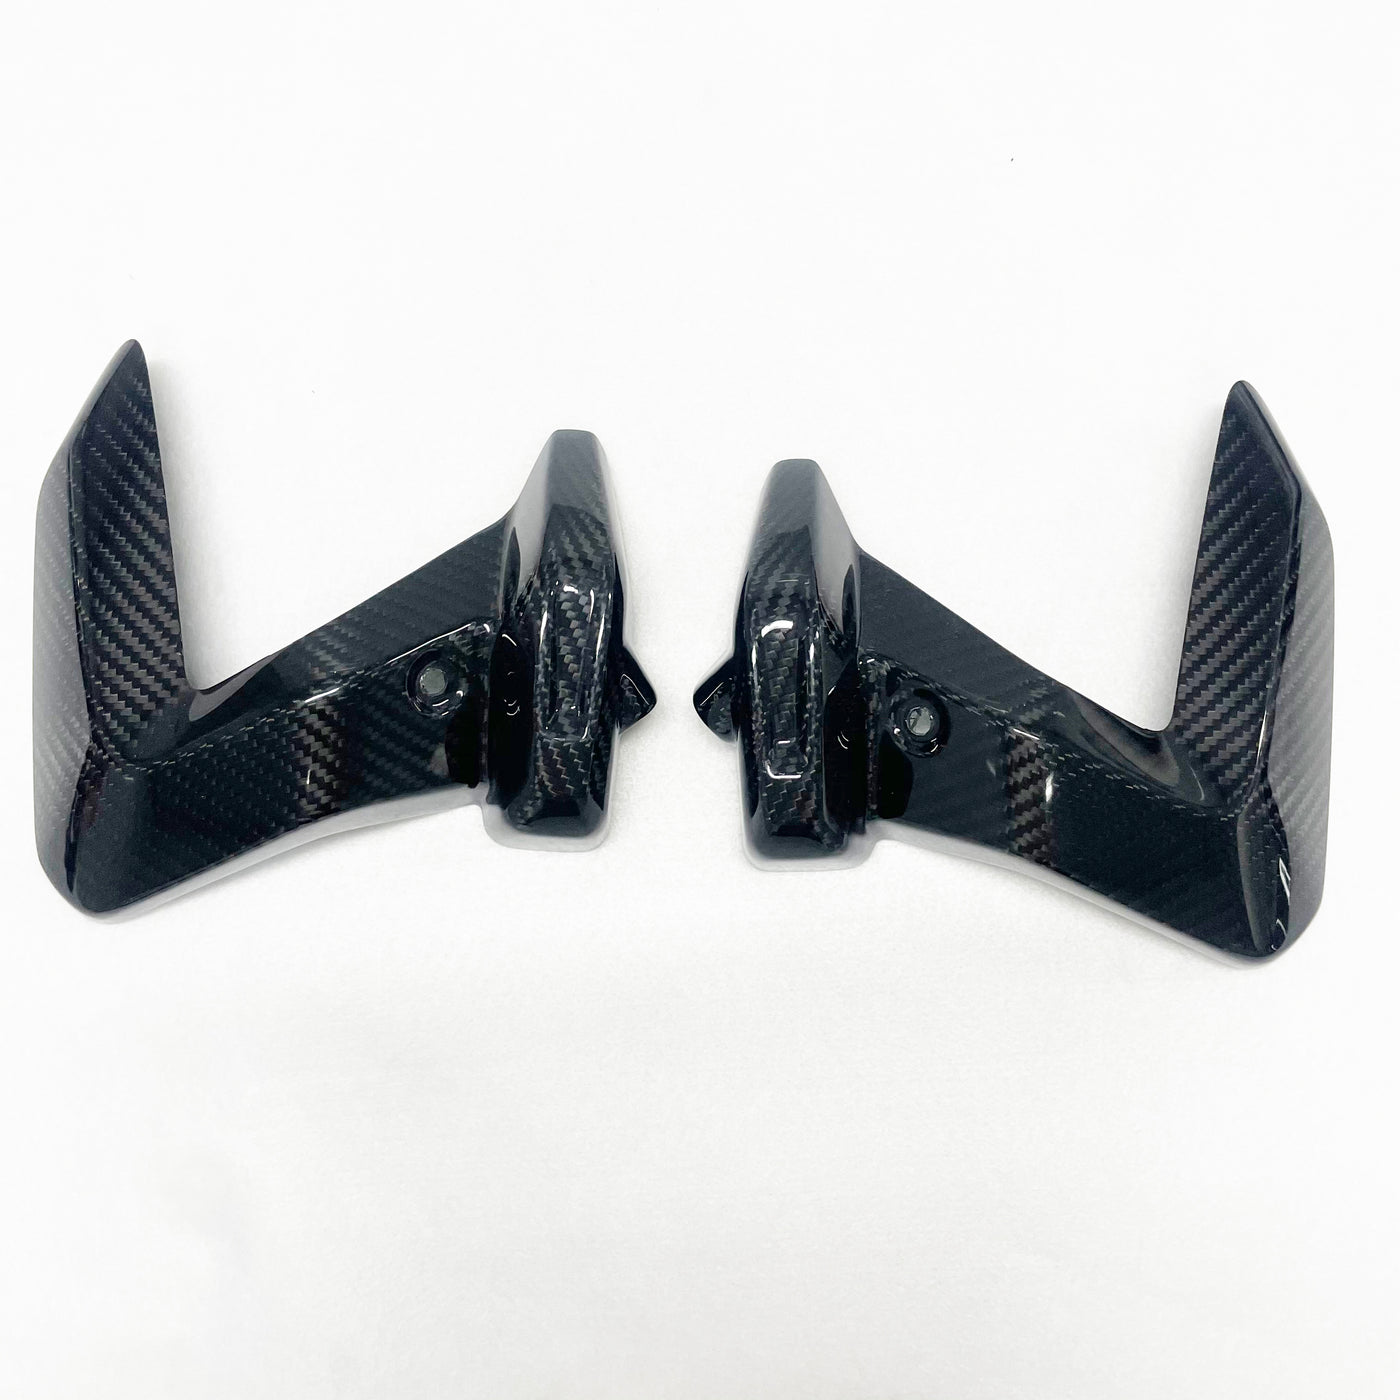 Real carbon fiber motor protective cover for BMW R1250GS-ADV